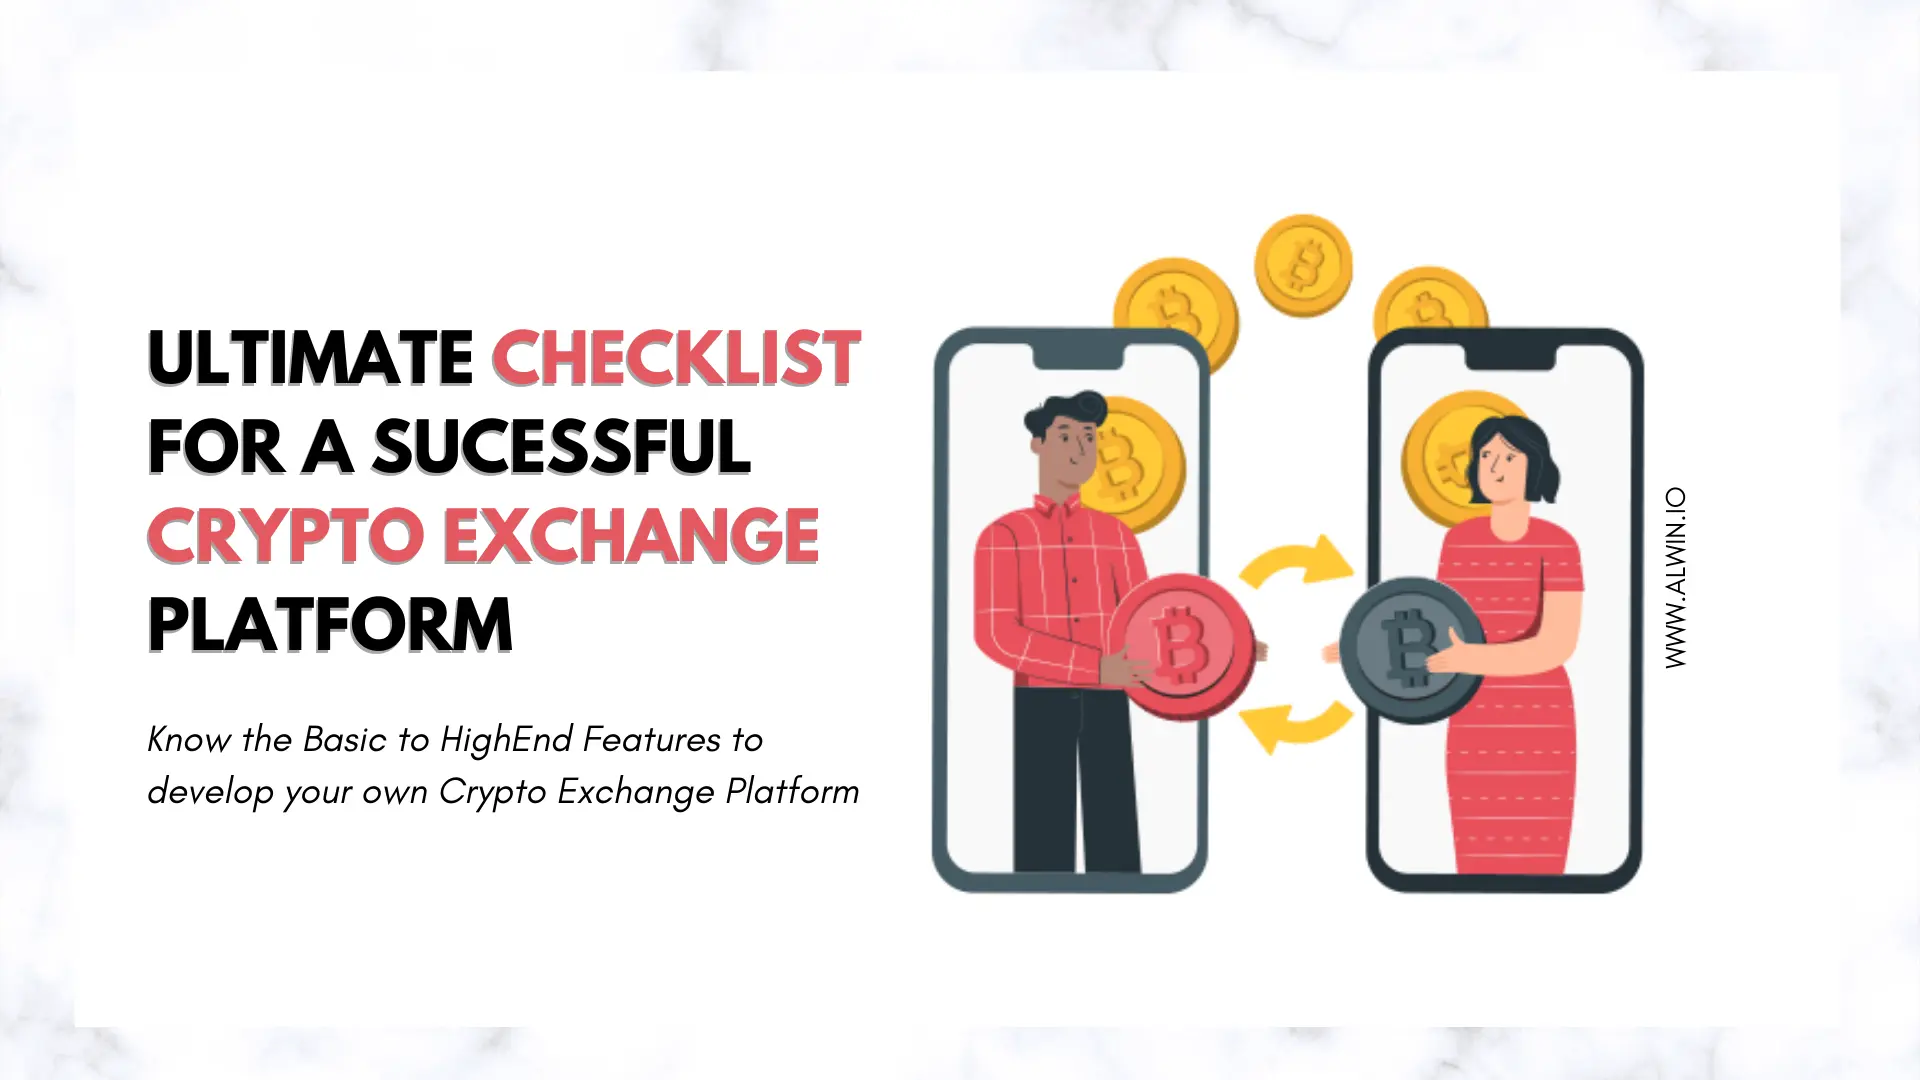 How to Develop Crypto Exchange Platform | Ethereum Expert Guide